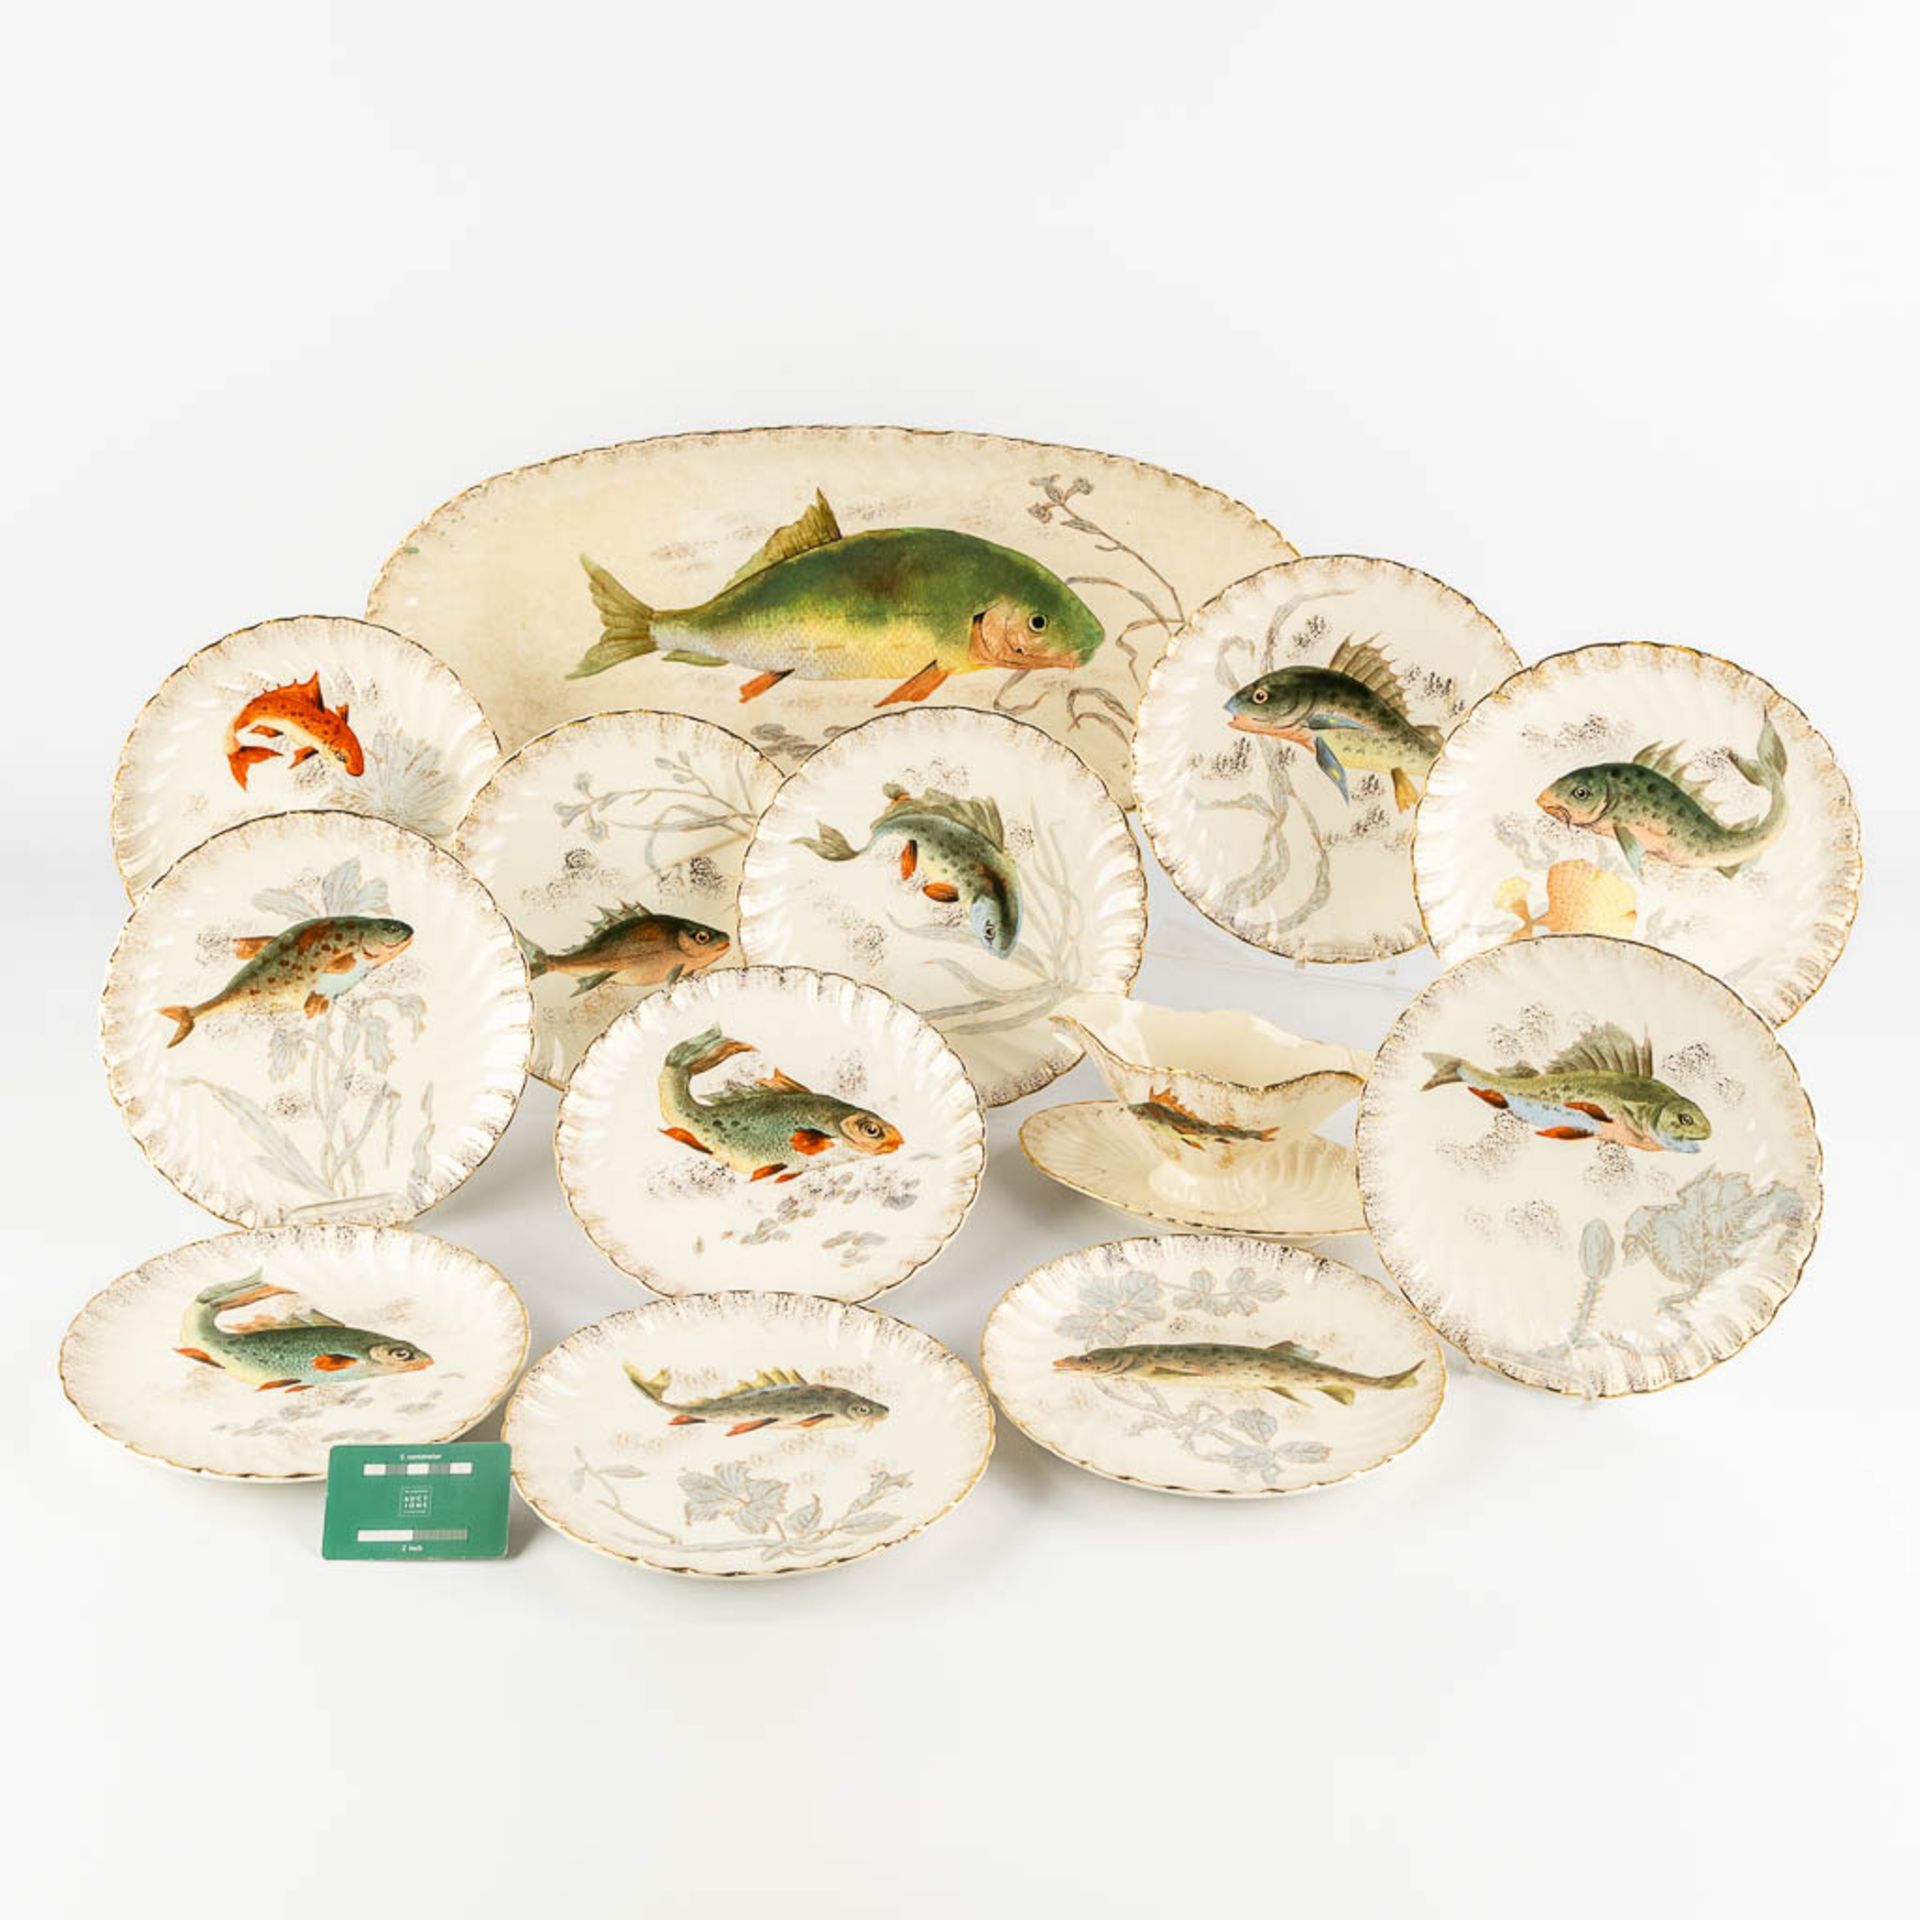 Bonn, a large fish service with serving platter and 11 plates. (W:58 x H:25 cm) - Image 2 of 17